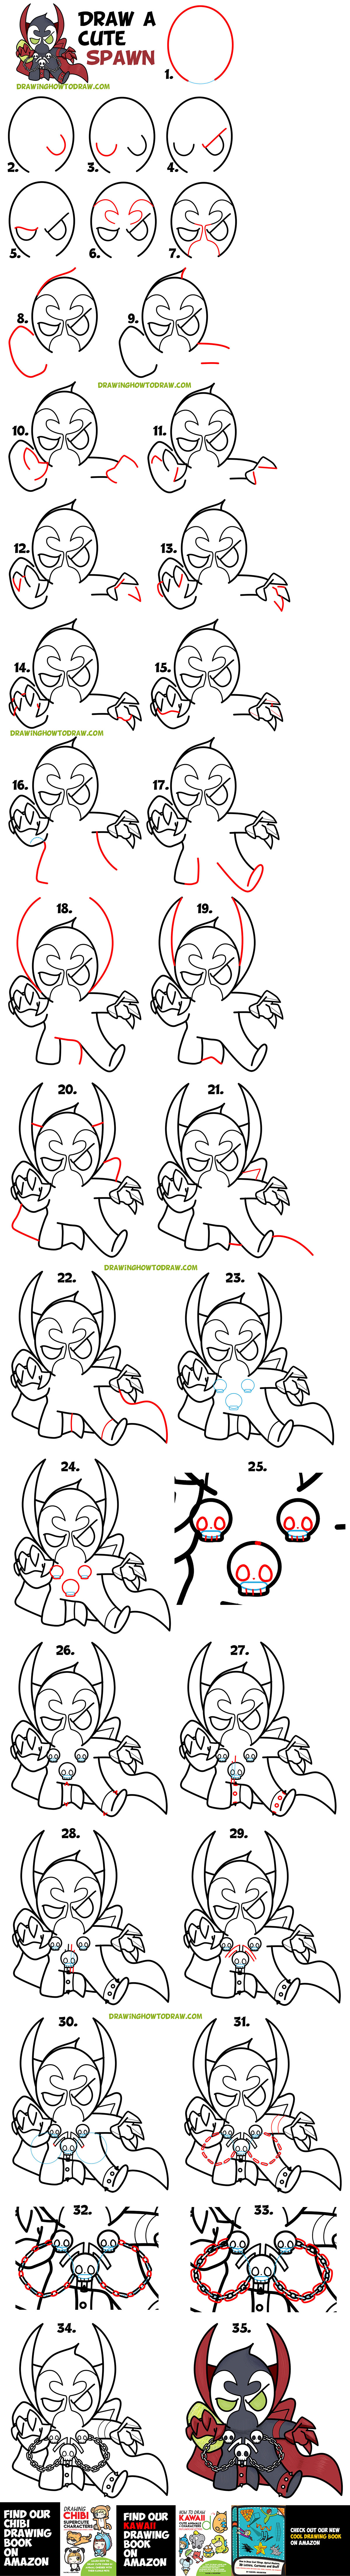 Learn How to Draw a Chibi Spawn, the AntiHero, with Simple Steps Drawing Lesson for Kids & Beginners